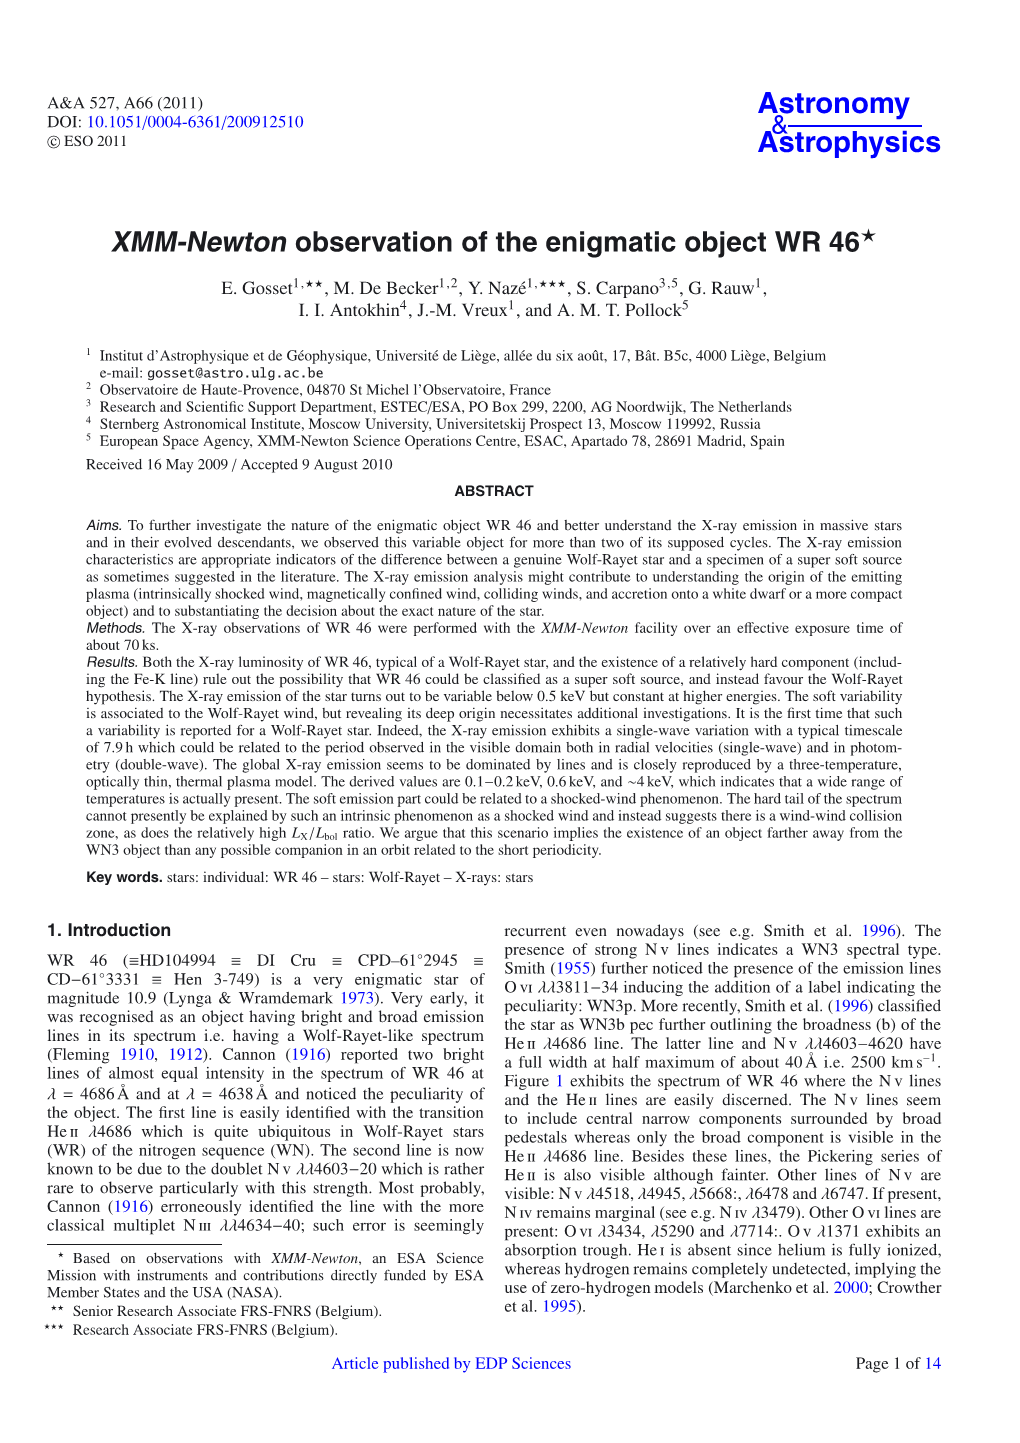 XMM-Newton Observation of the Enigmatic Object WR 46